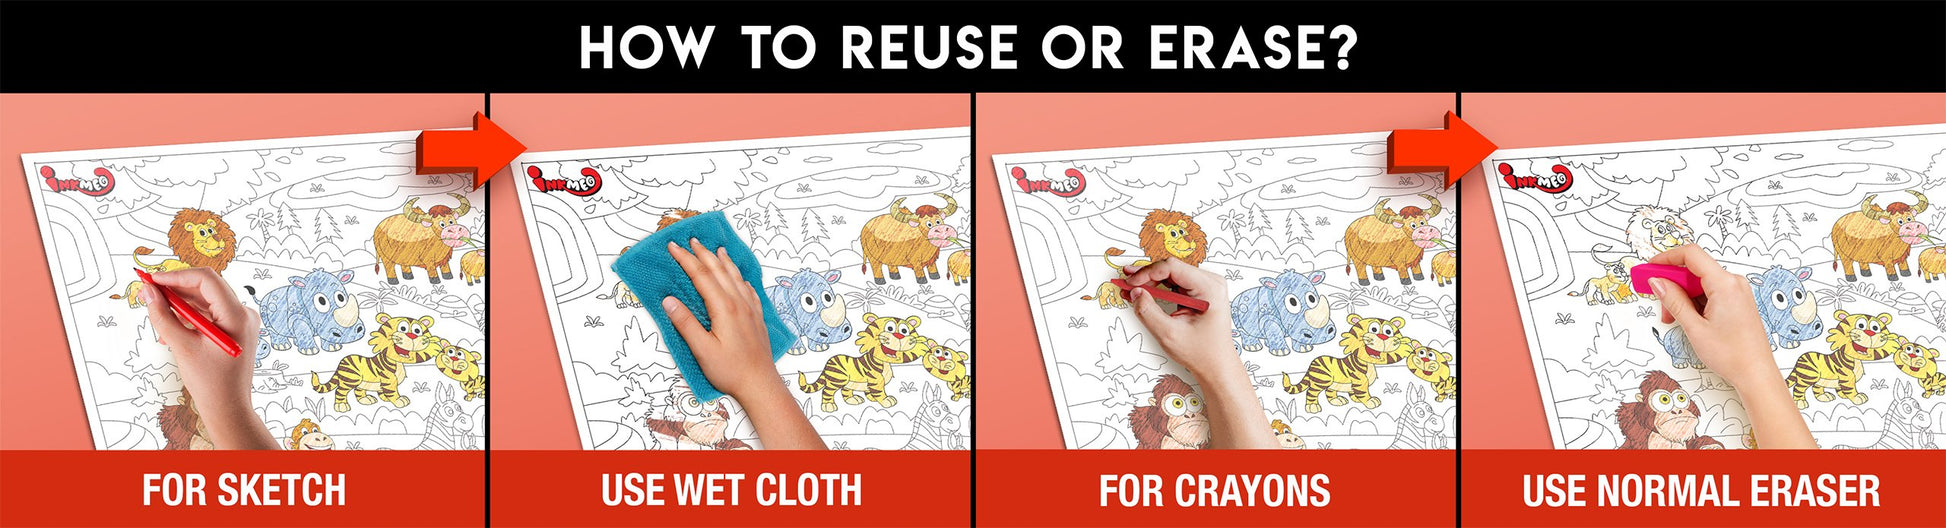 The image has a red background with four pictures demonstrating how to reuse or erase: the first picture depicts sketching on the sheet, the second shows using a wet cloth to remove sketches, the third image displays crayons coloring on the sheet, and the fourth image illustrates erasing crayons with a regular eraser.